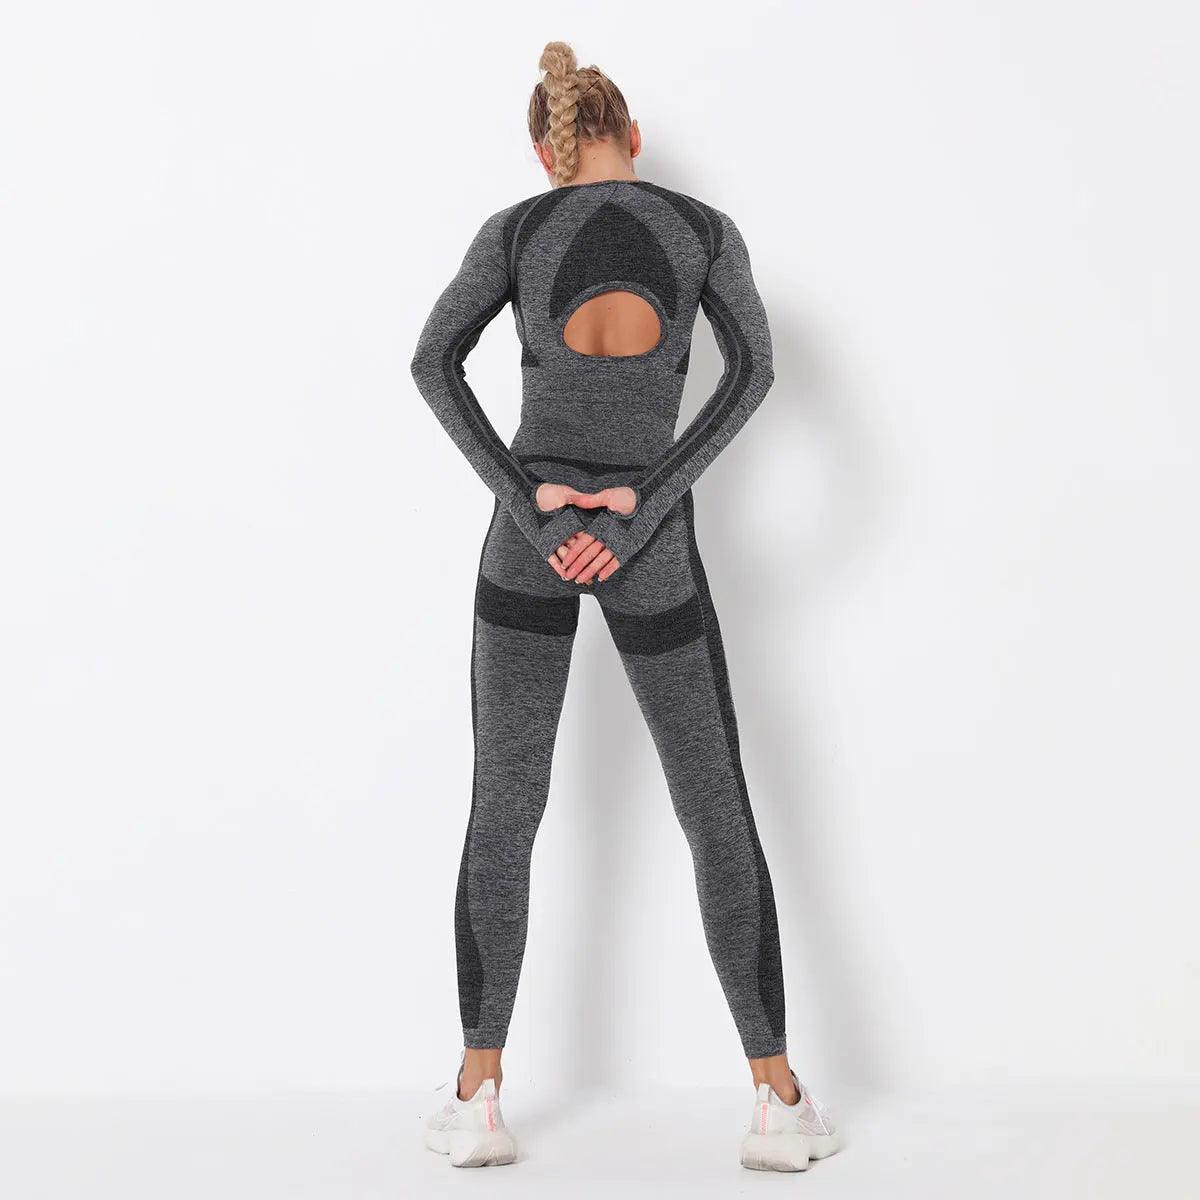 This SNUG IS CRAZY 🔥.It fits like a glove 🧤 This DIVA Yoga Set